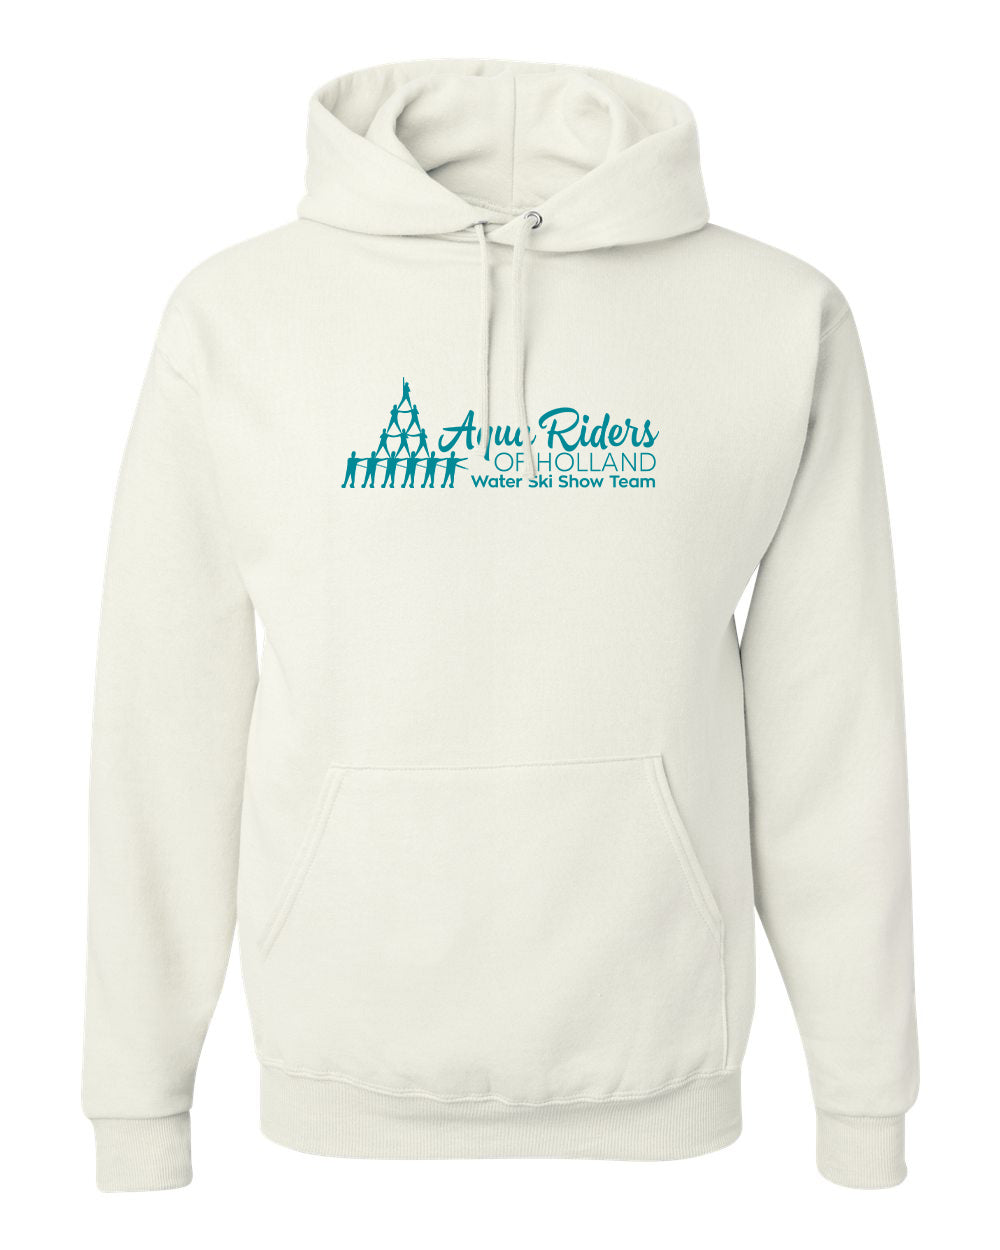 Aqua Riders - Adult Hoodie - 996MR (color options available)